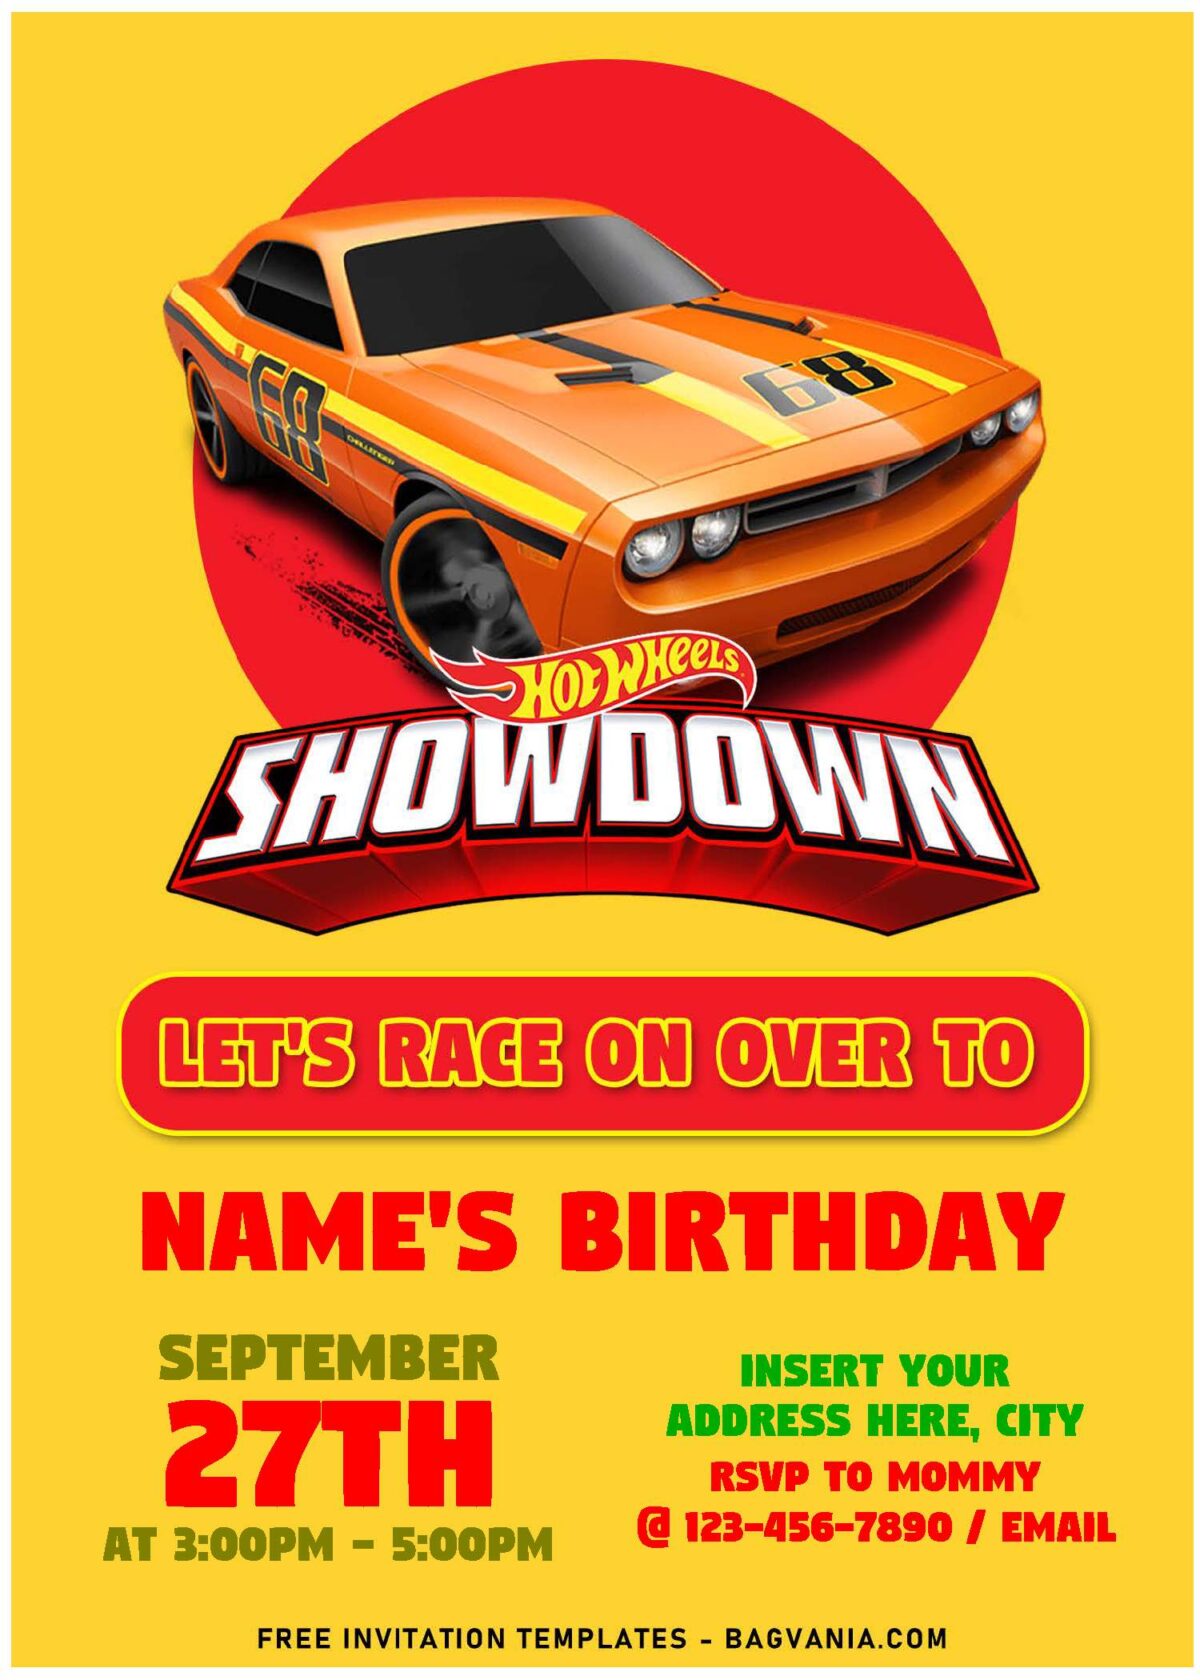 (Free Editable PDF) Race With The Winner Hot Wheels Birthday Invitation Templates with mustang